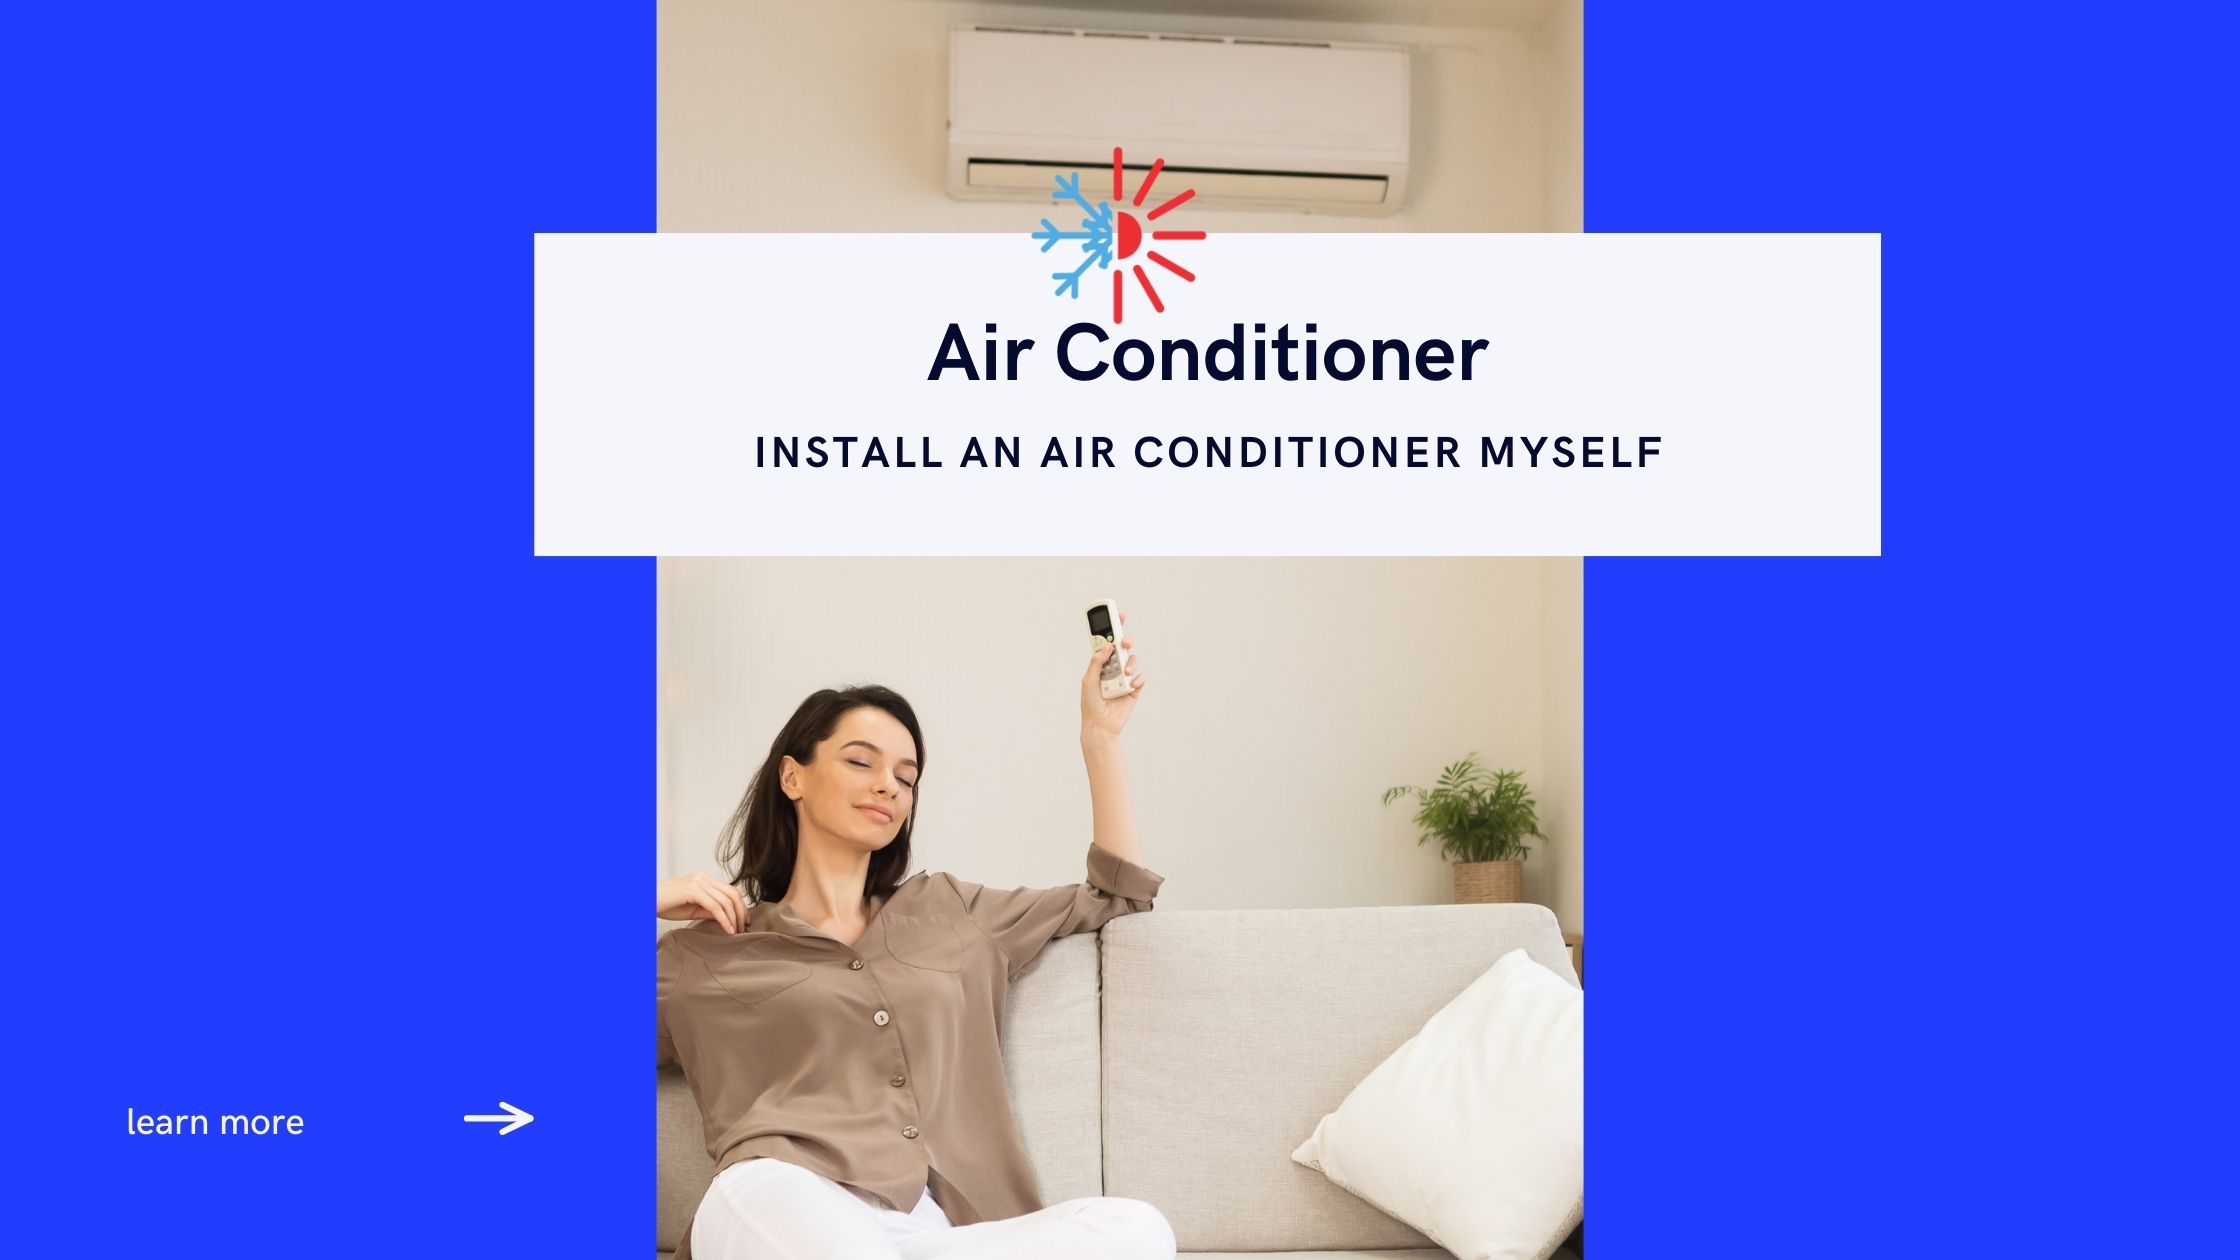 Can I Install An Air Conditioner Myself, Or Do I Need A Professional